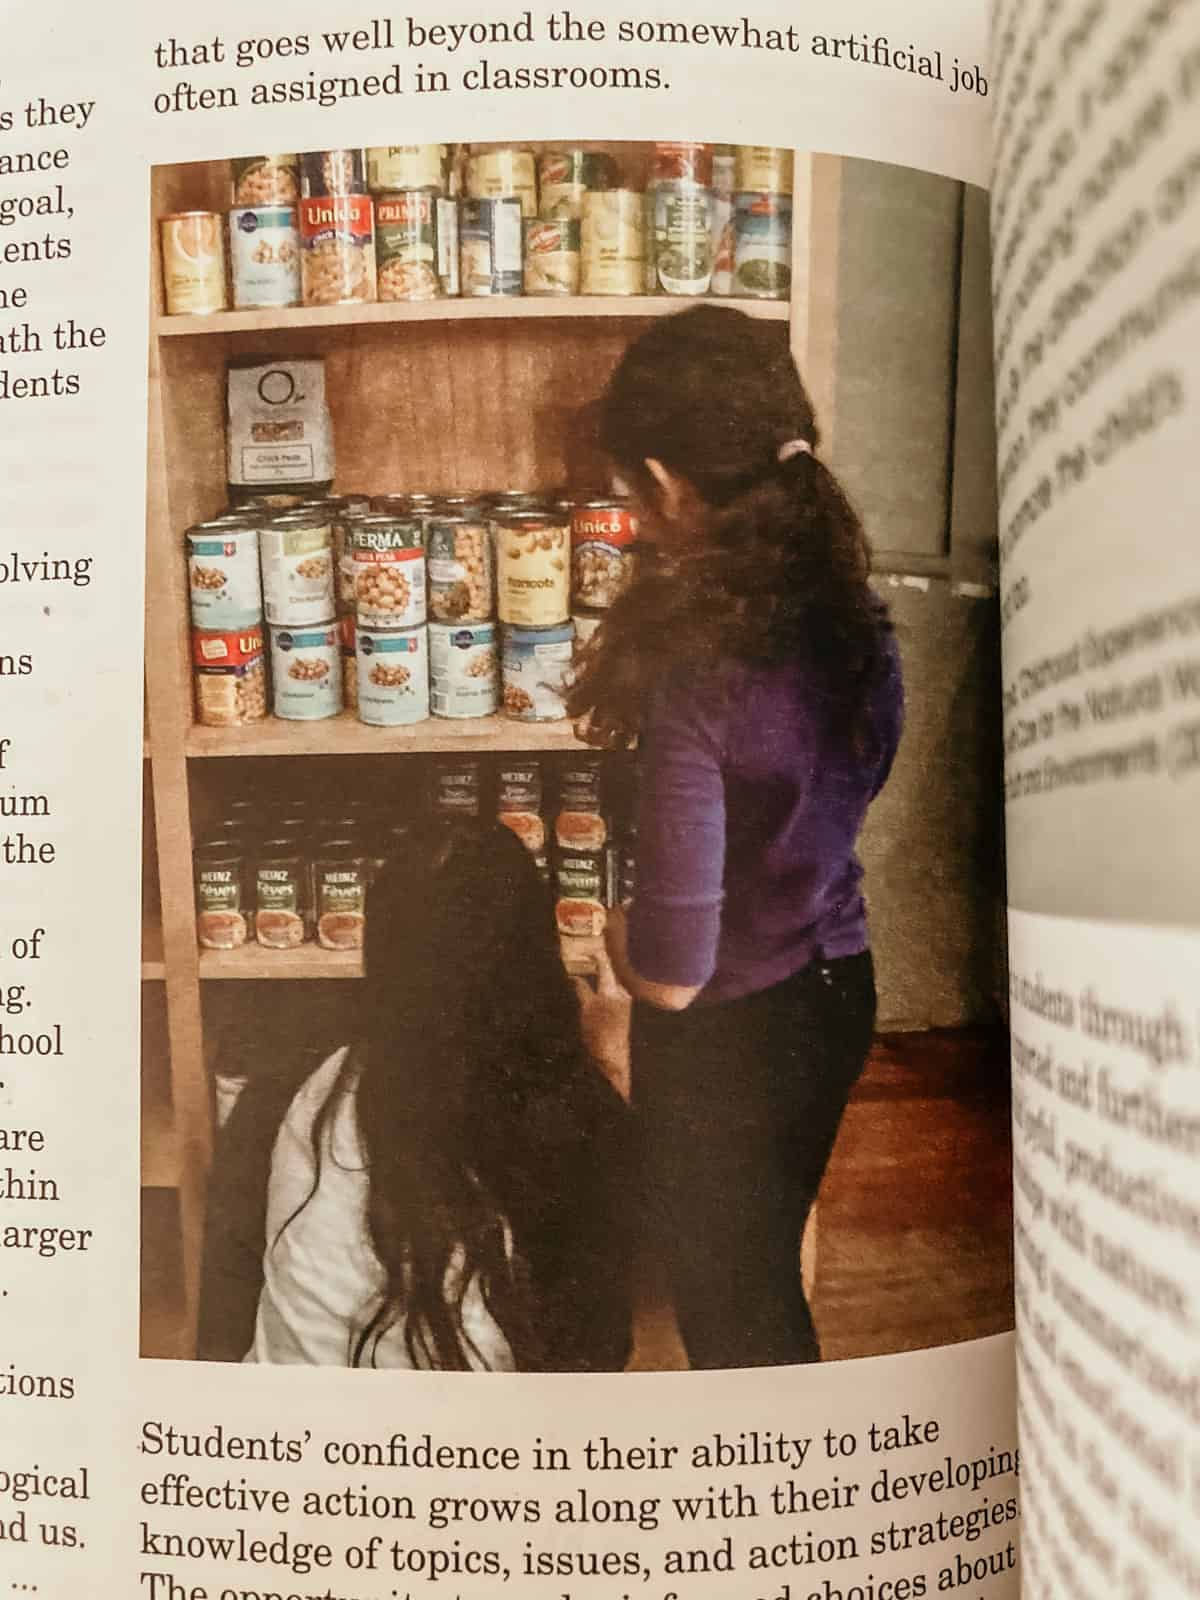 child and adult examining the contents of a pantry and the canned goods inside